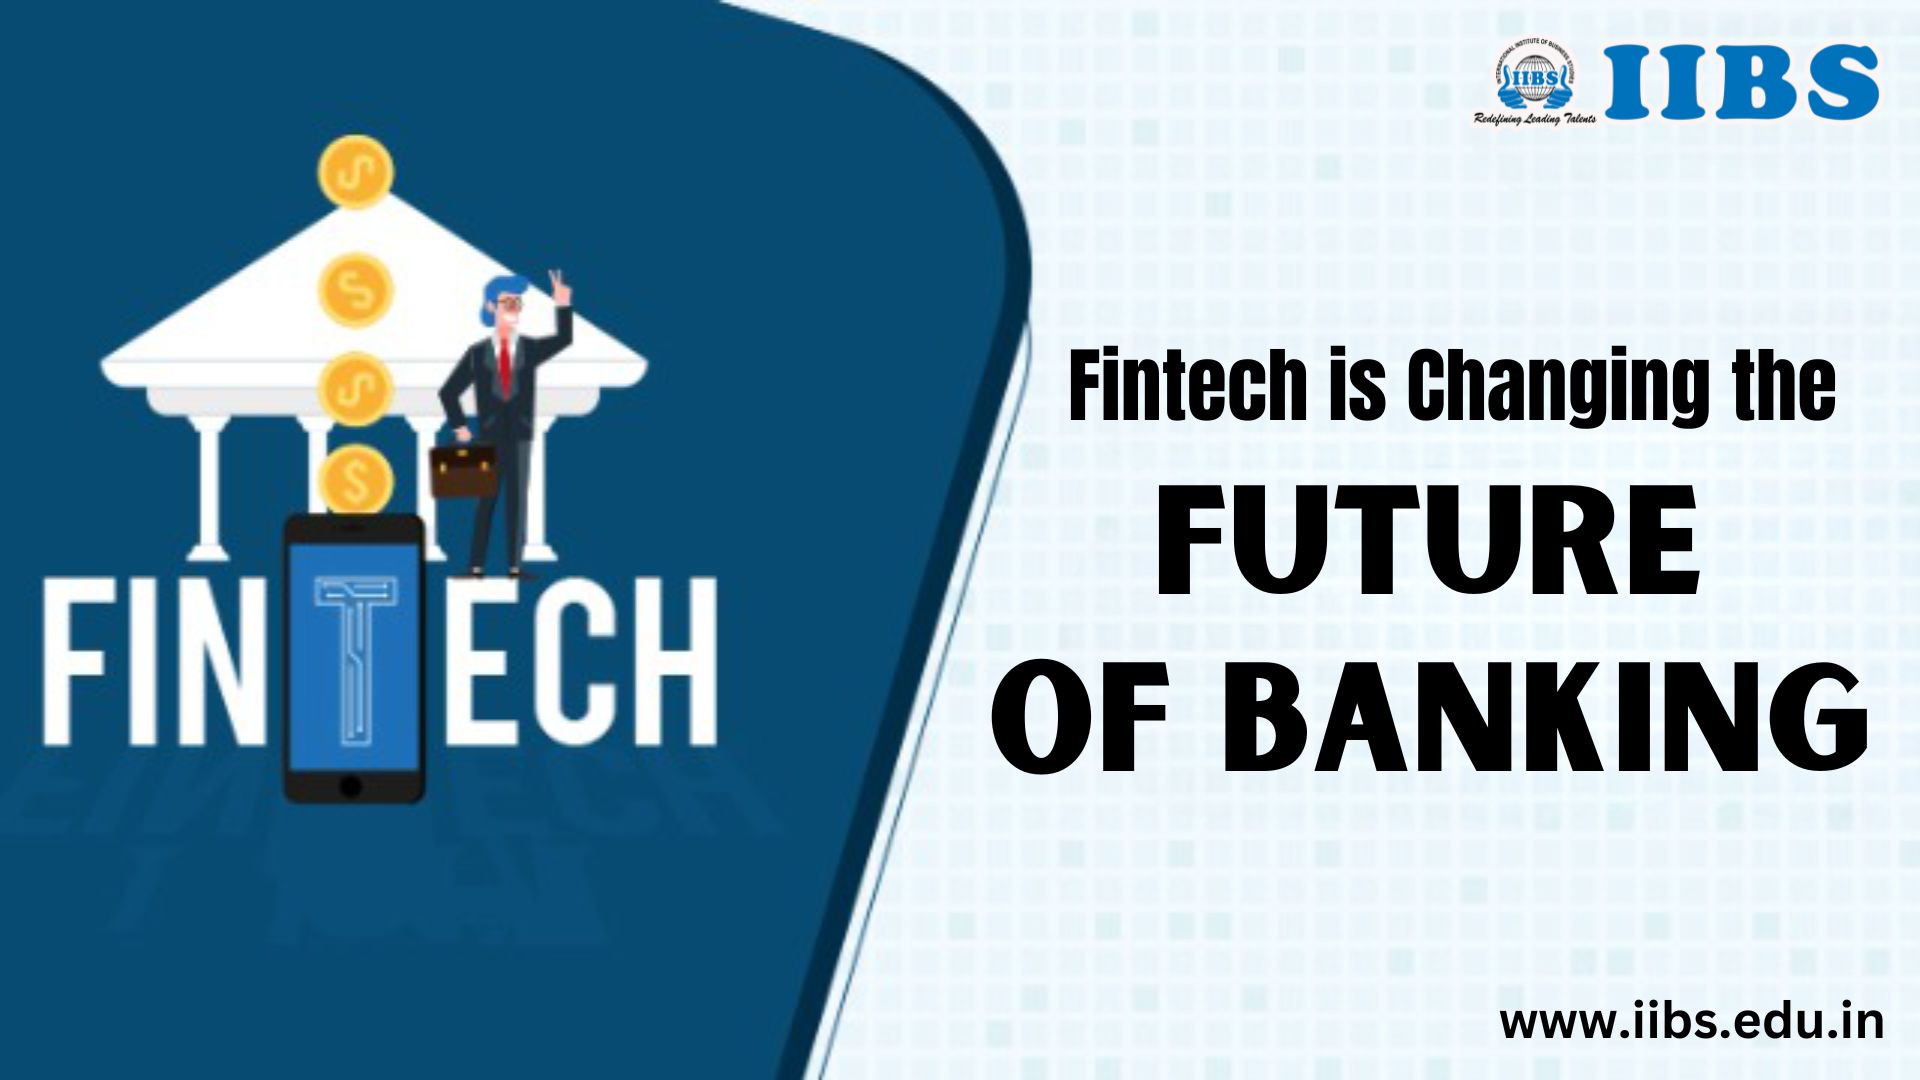 Fintech is changing the Future of Banking